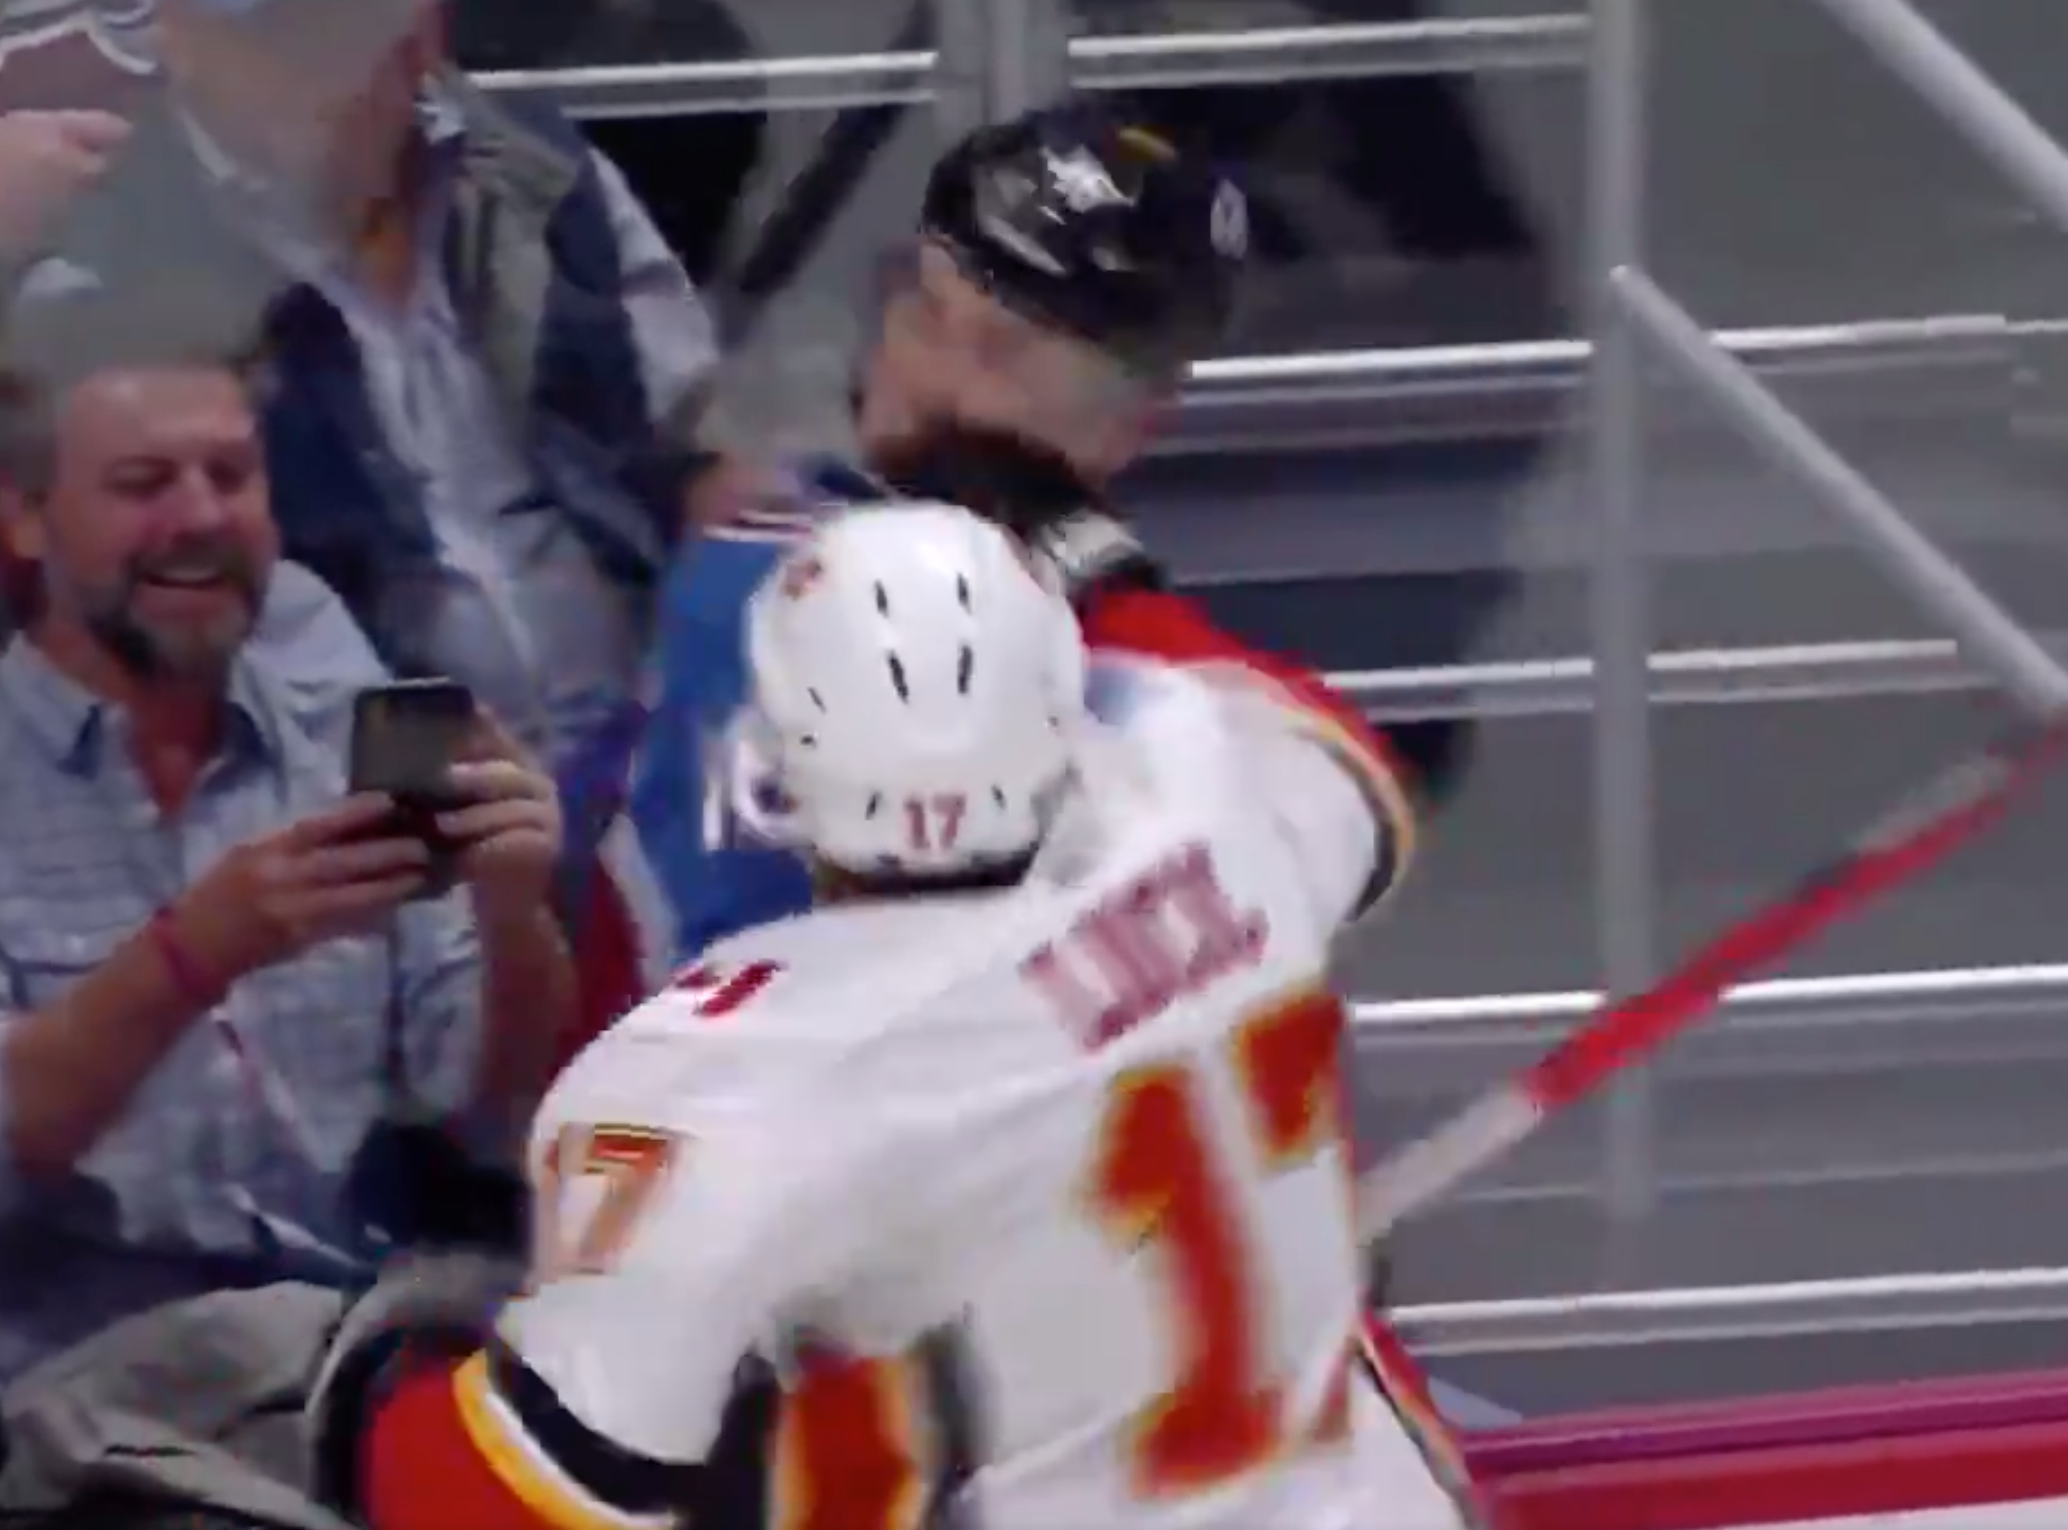 Milan Lucic accidentally punches linesman in the face during fight